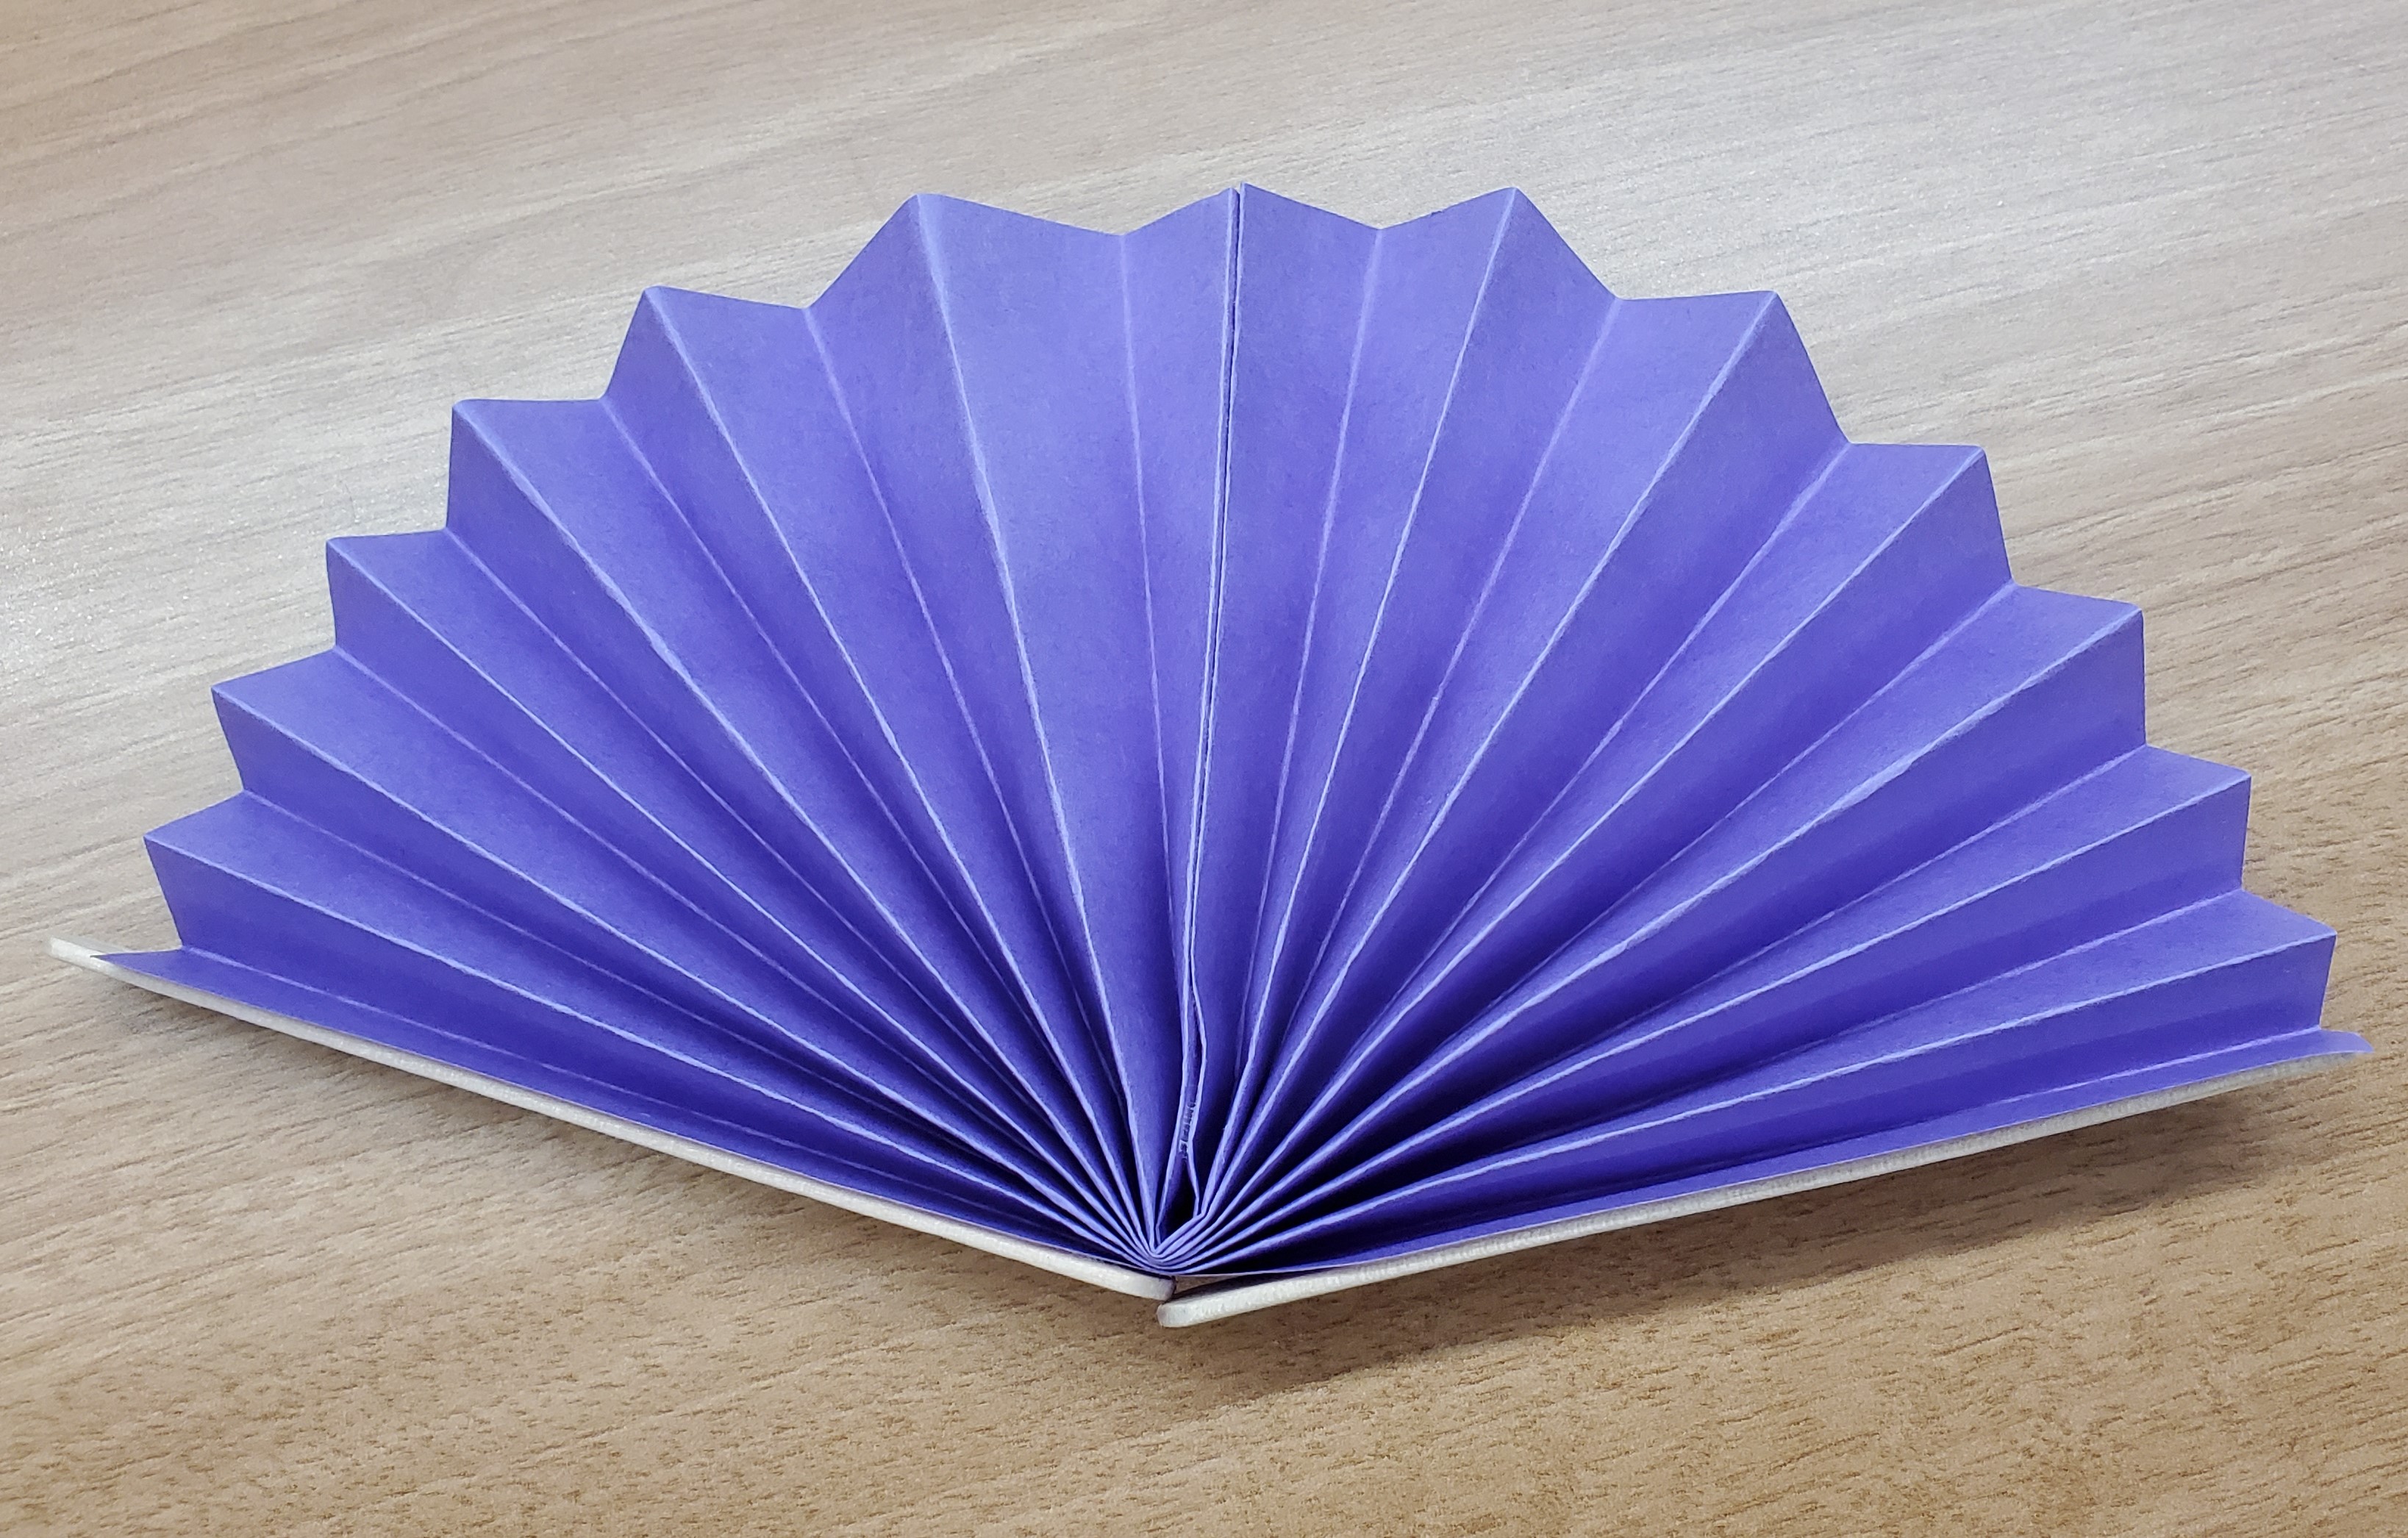 Example of a paper fan craft. Paper fan made from purple construction paper.